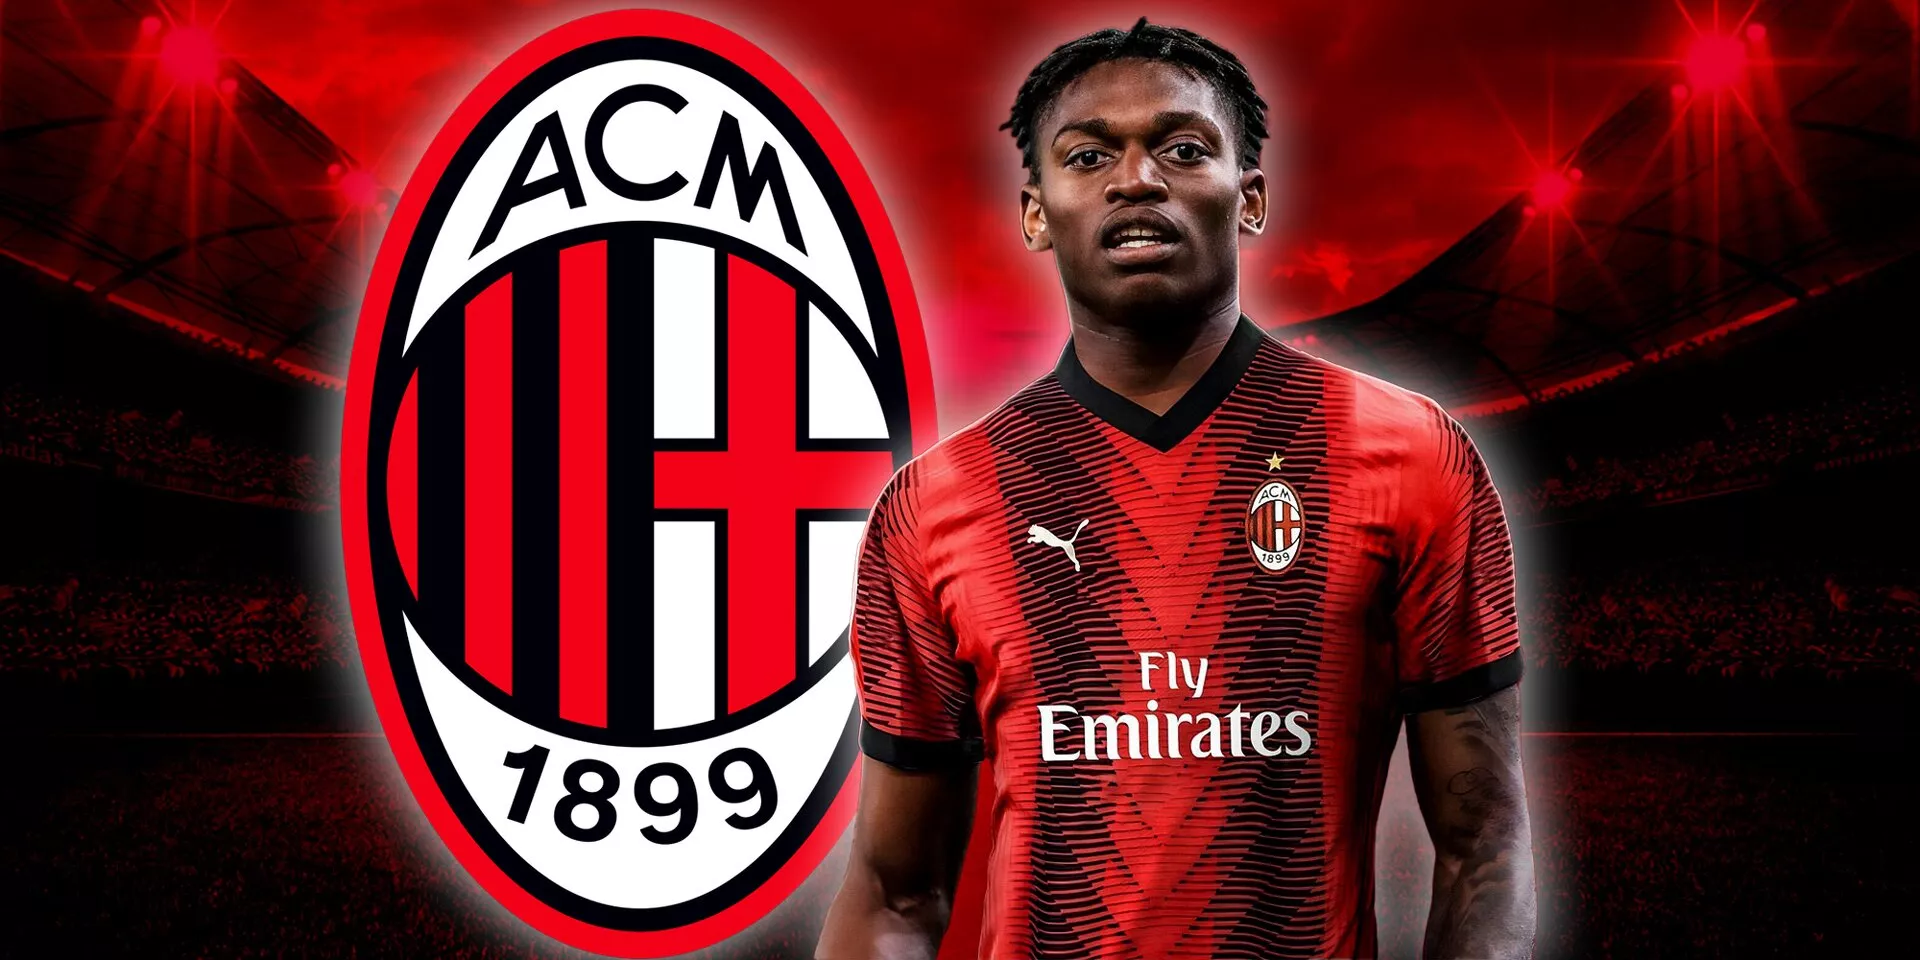 AC Milan 2019/20 Kit: Images of New Home Designs for Upcoming Season Leaked  - Sports Illustrated